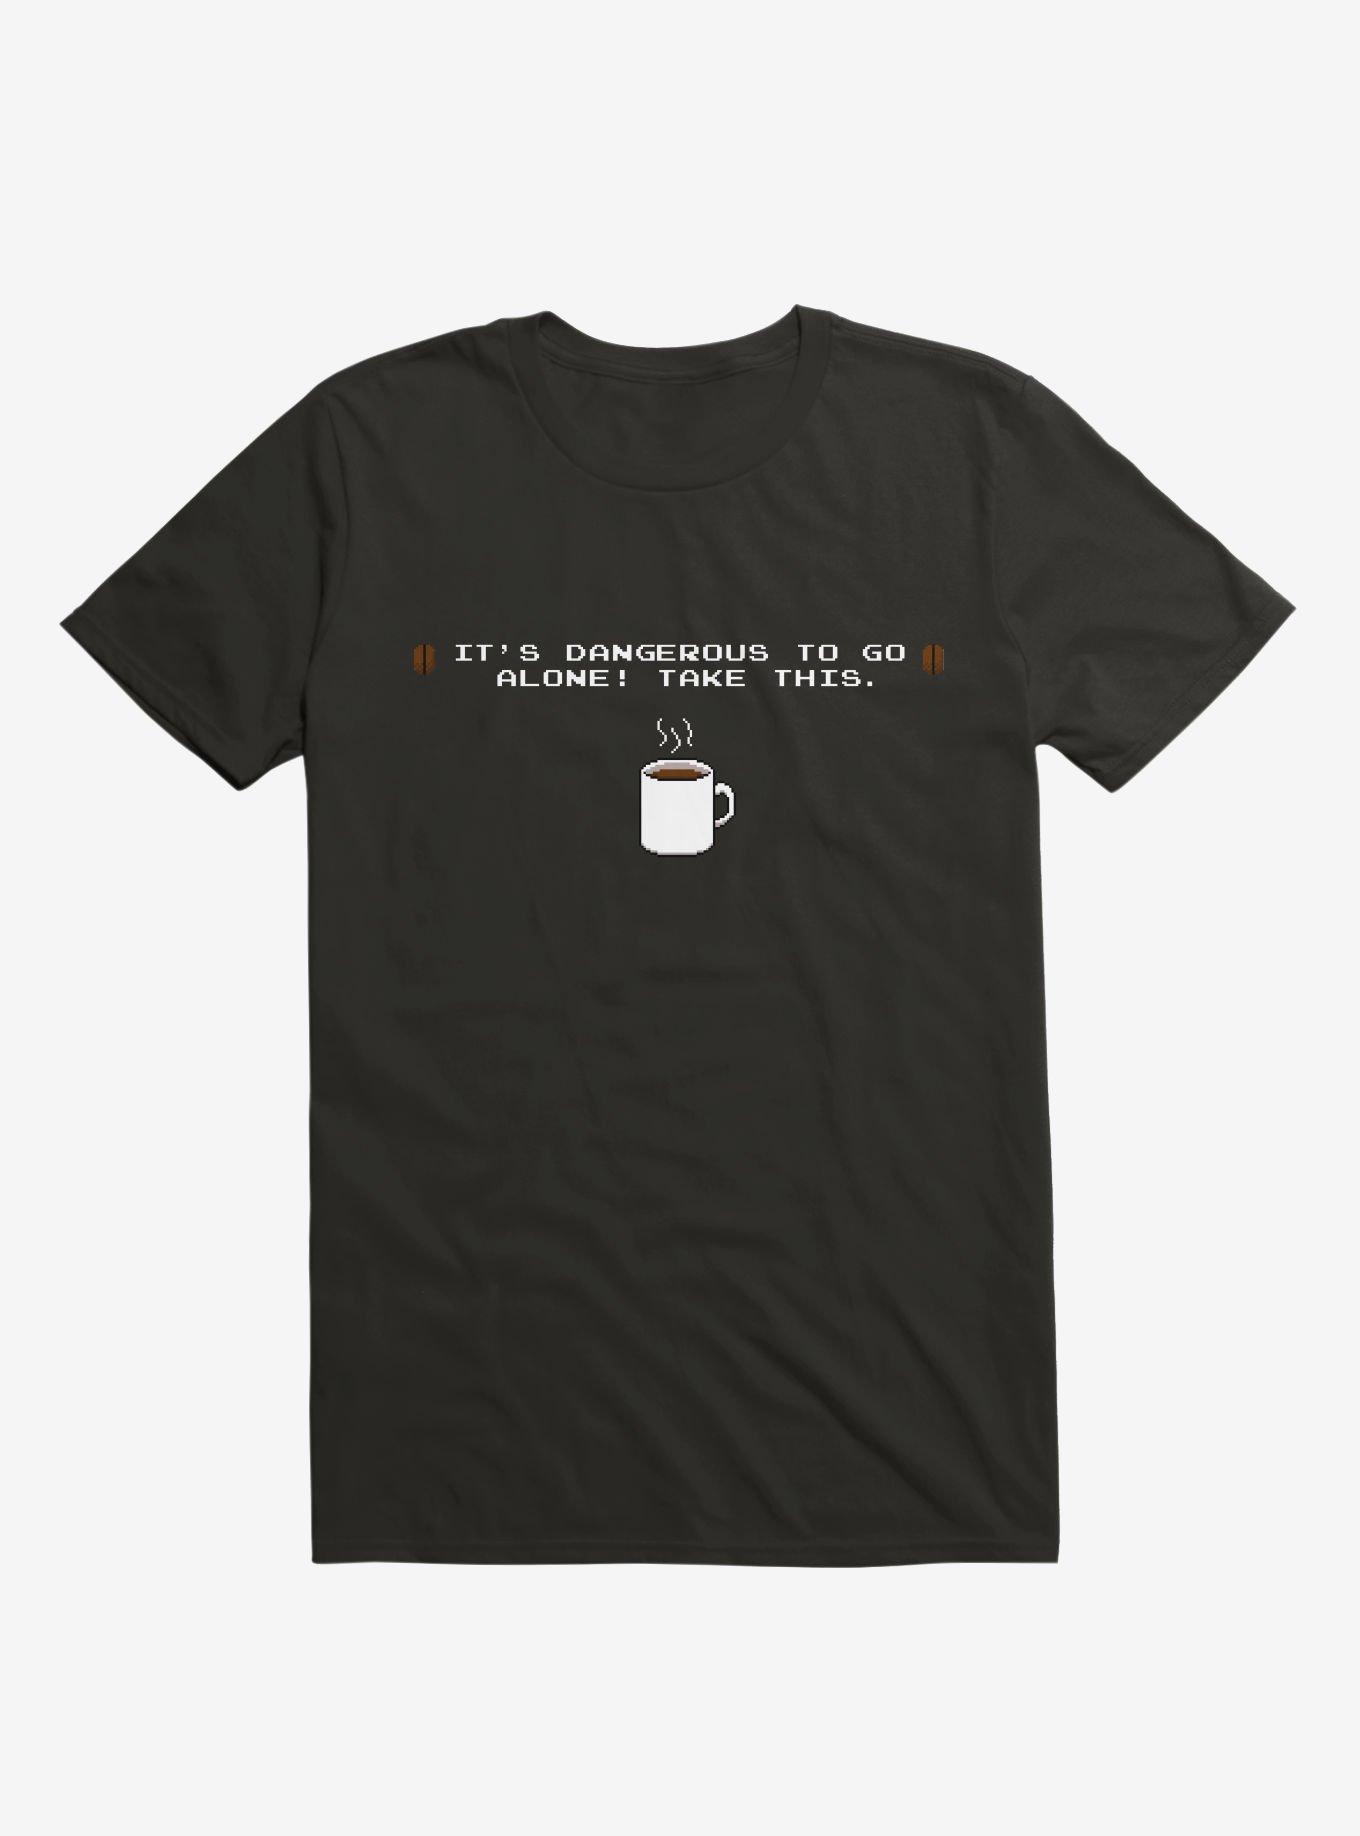 It's Dangerous To Go Alone, Take This Coffee T-Shirt, BLACK, hi-res